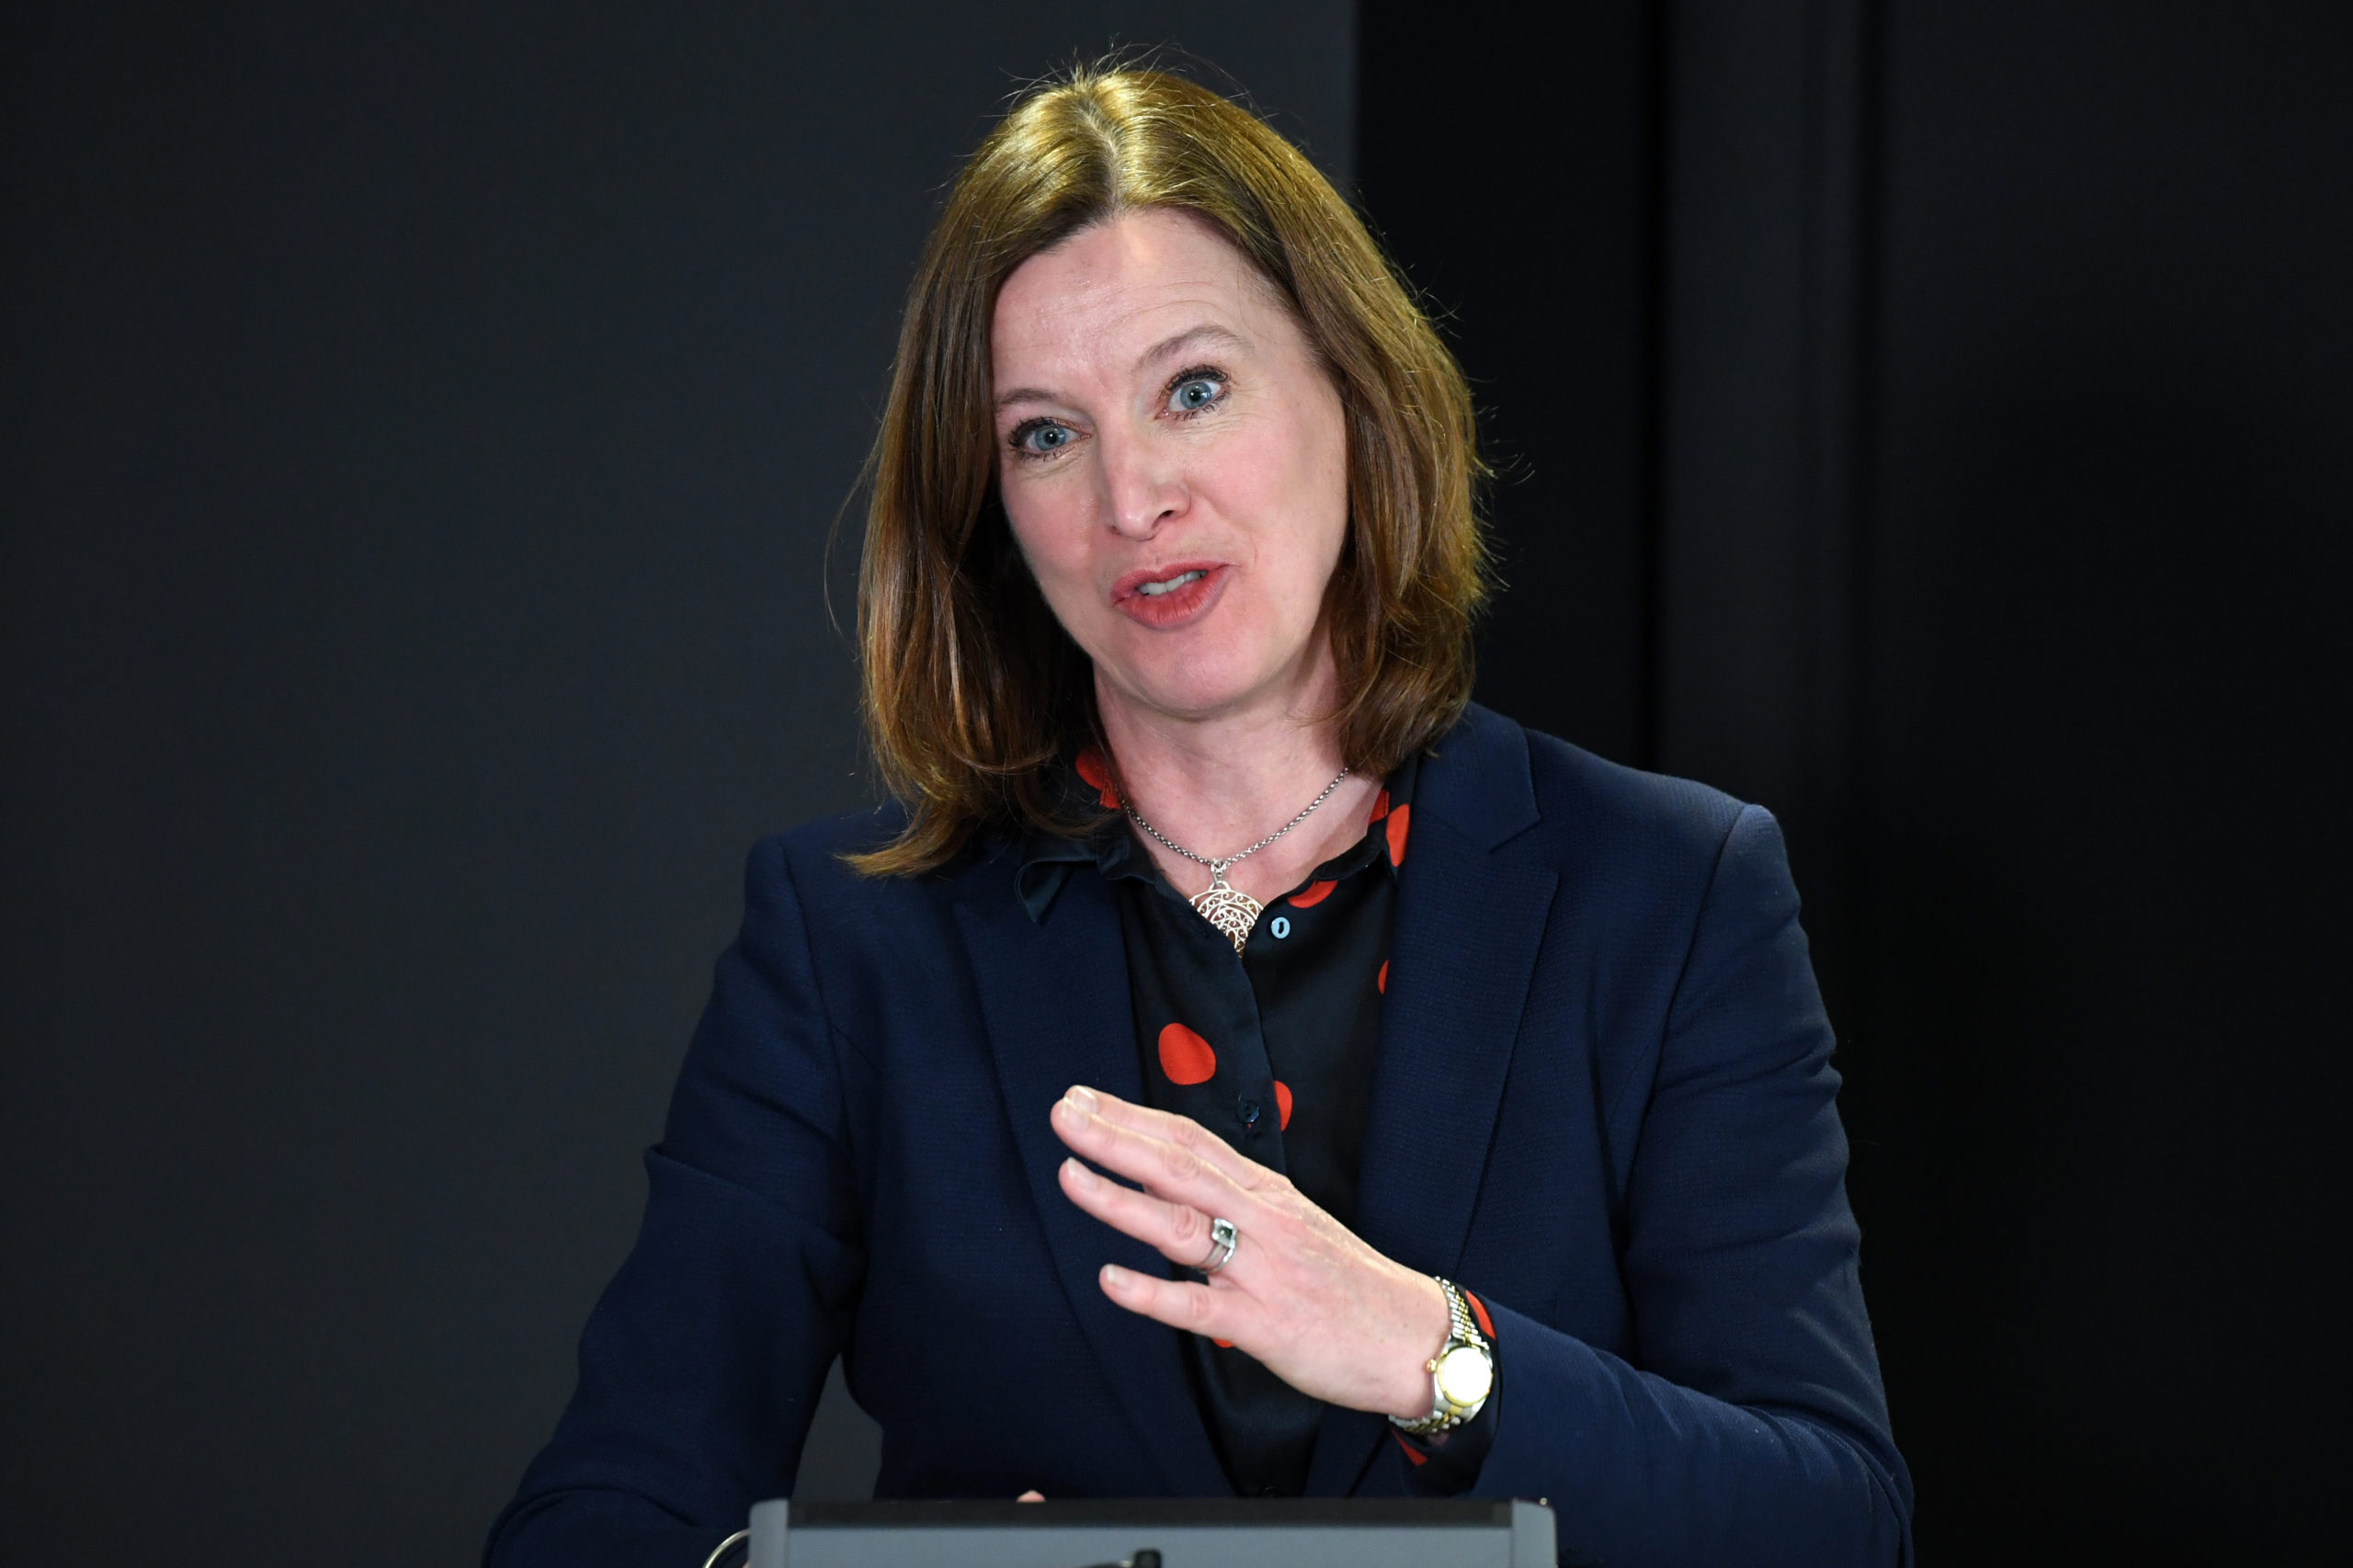 Chief Medical Officer for Scotland, Catherine Calderwood